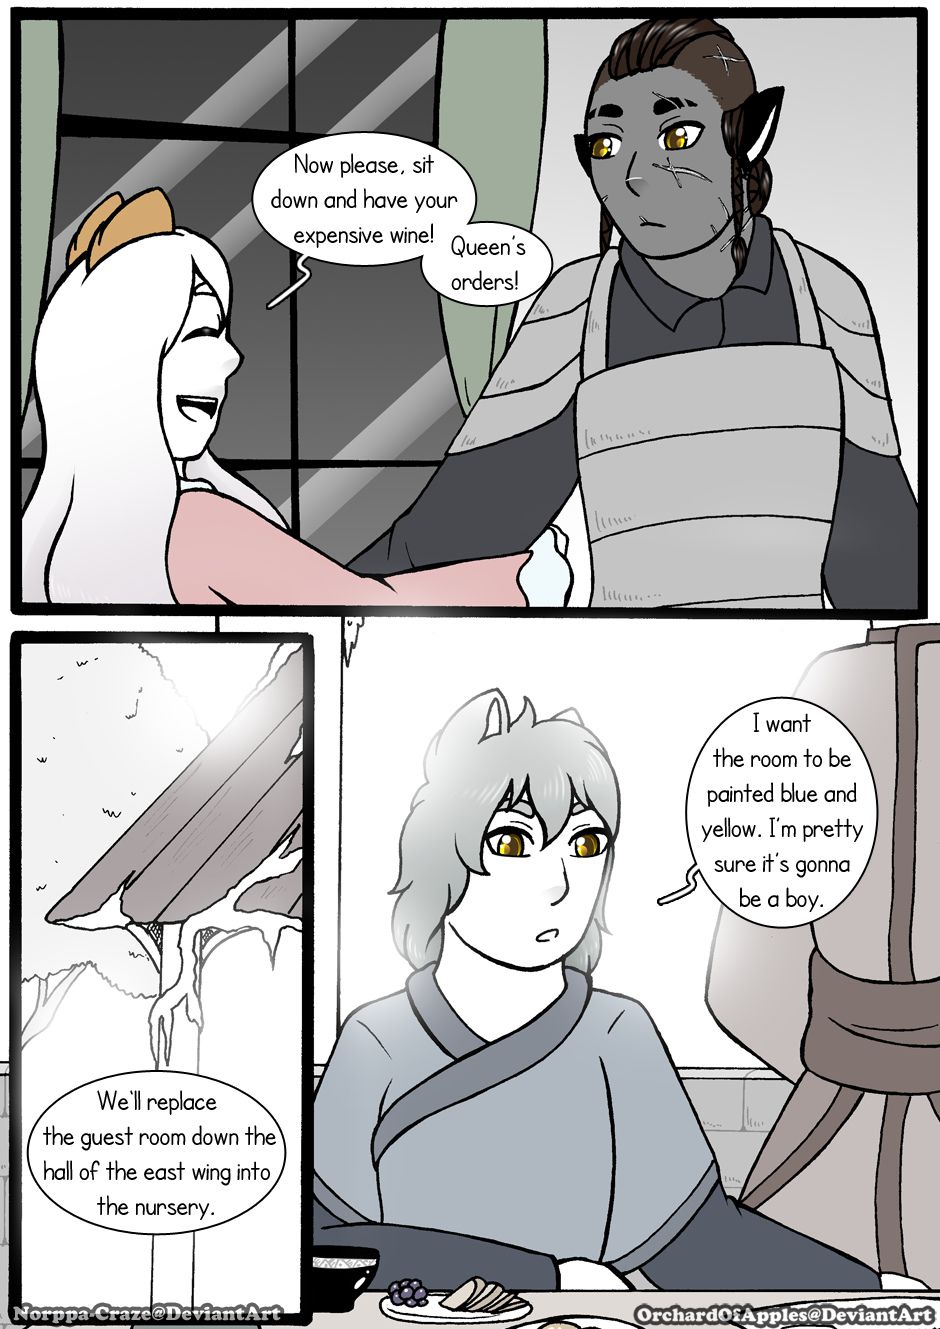 [Jeny-jen94] Between Kings and Queens [Ongoing] 317